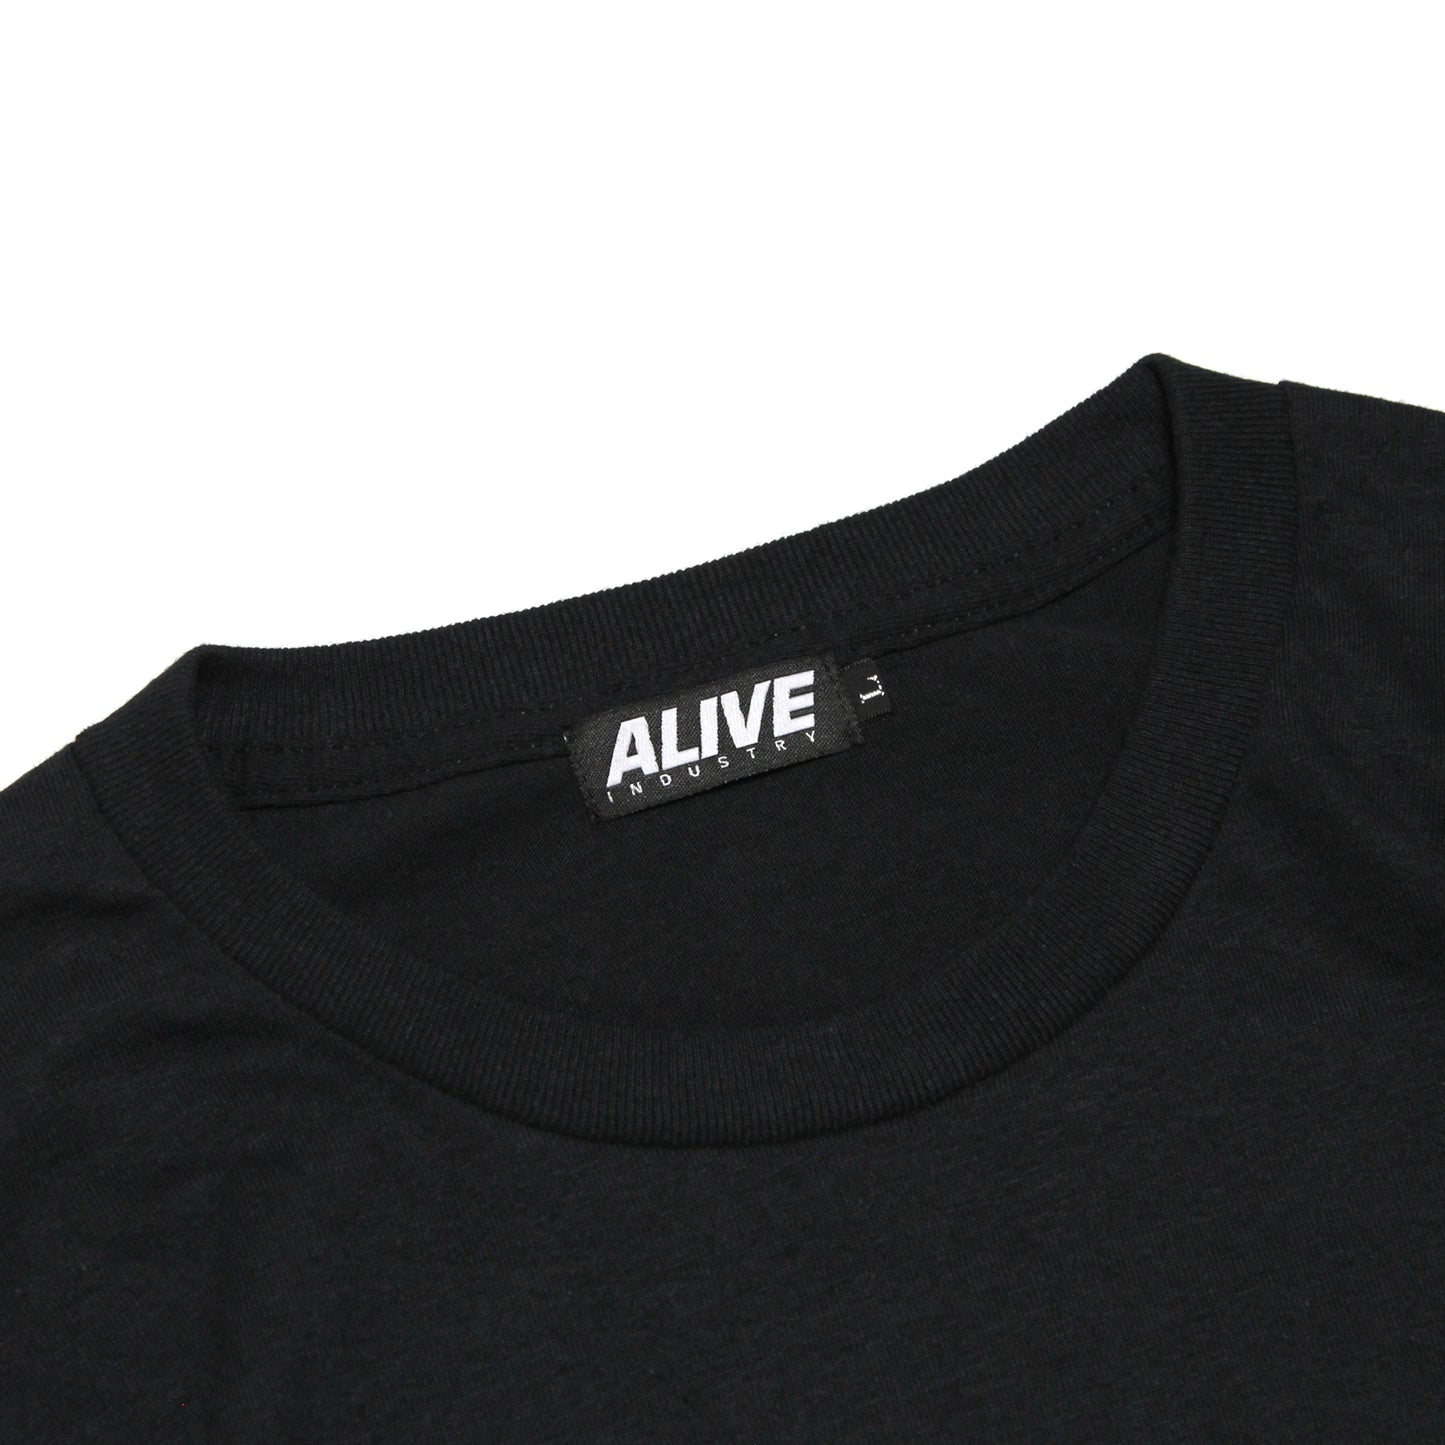 ALIVE INDUSTRY X MOTO-BUNKA - Limited Collaboration T-Shirt Designed by Hirotton/Black